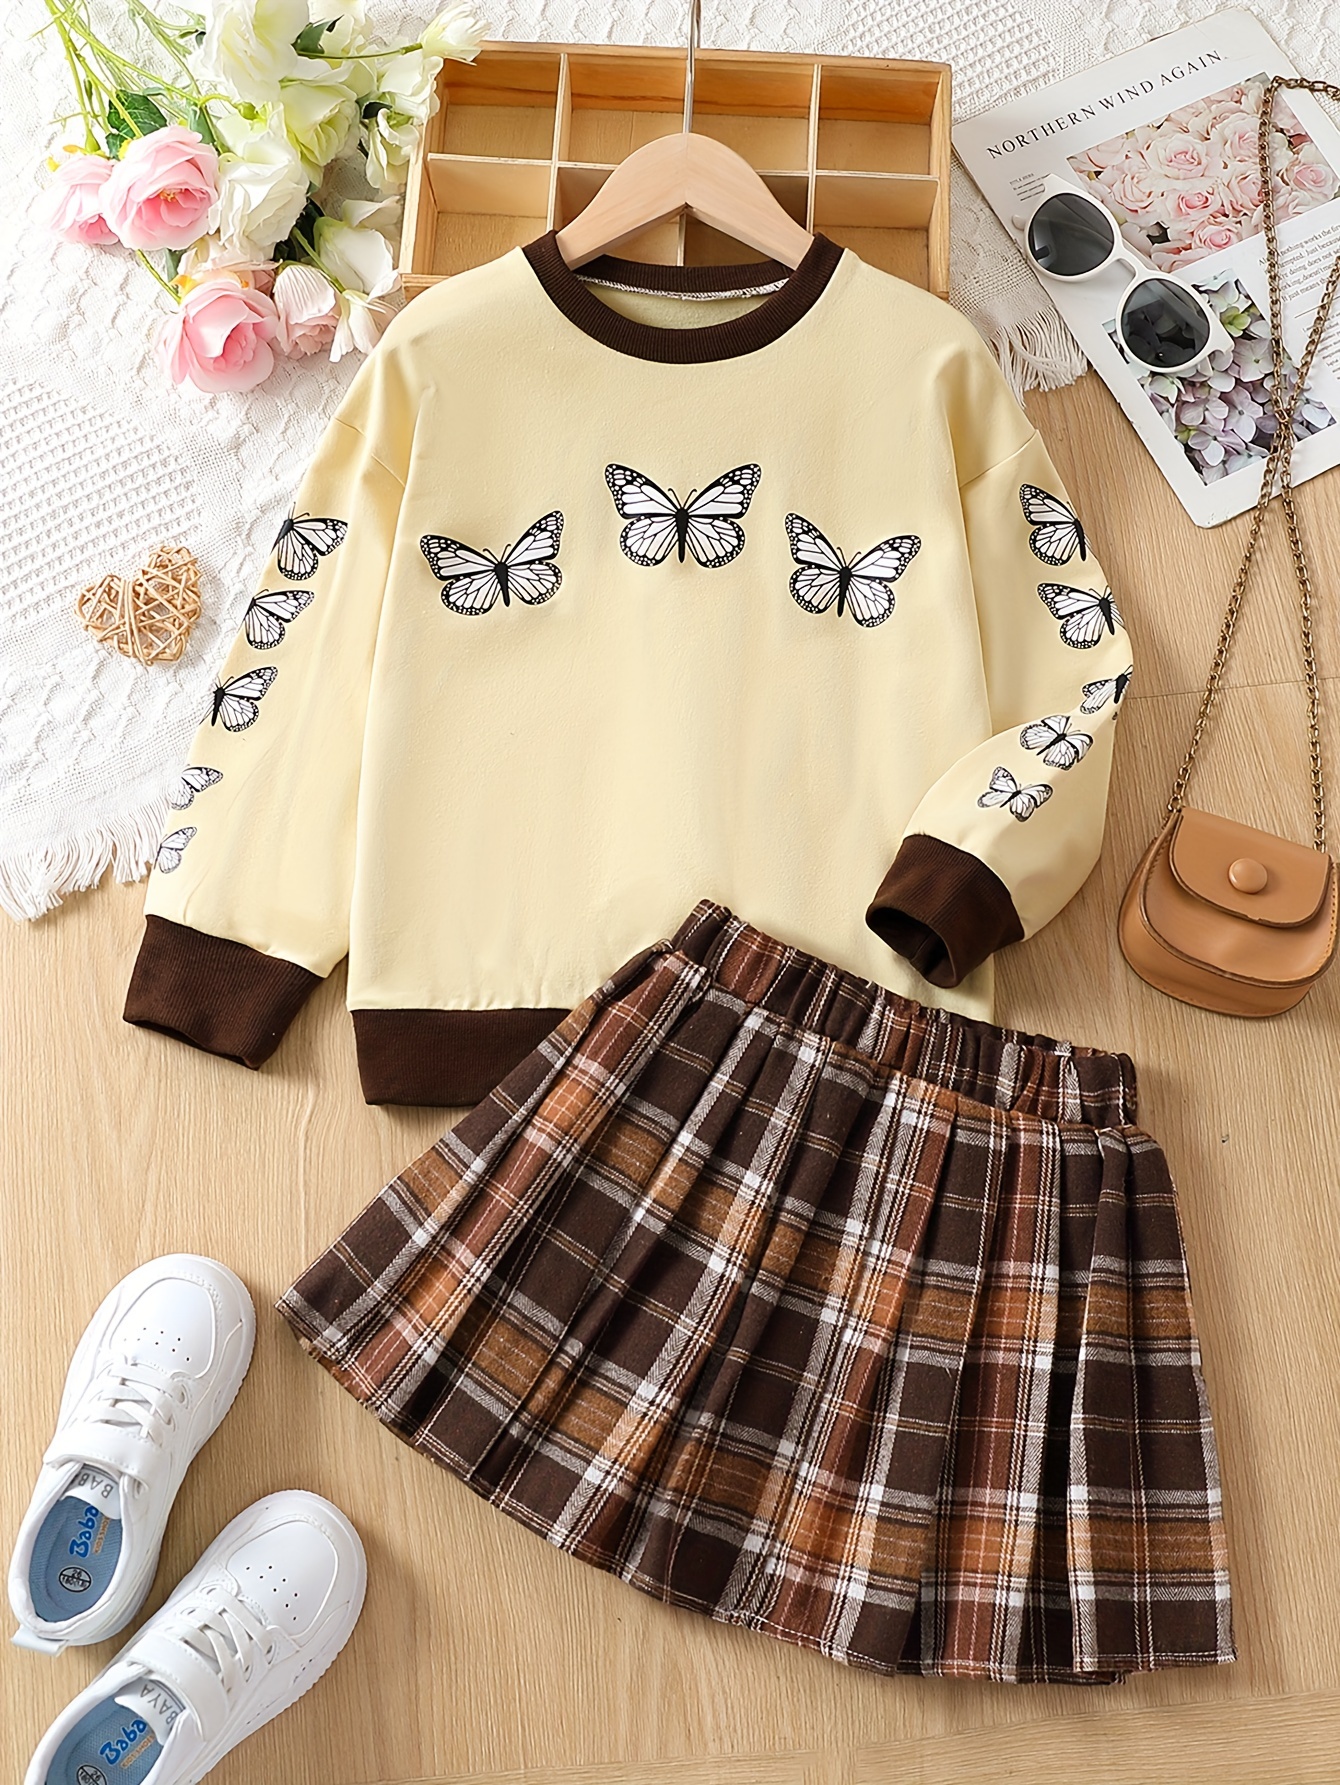 Girls' 2-piece Preppy Style Outfits, Butterfly Print Top & Plaid Pleated  Skirt, Comfy Sets Kids Clothes For Spring Fall